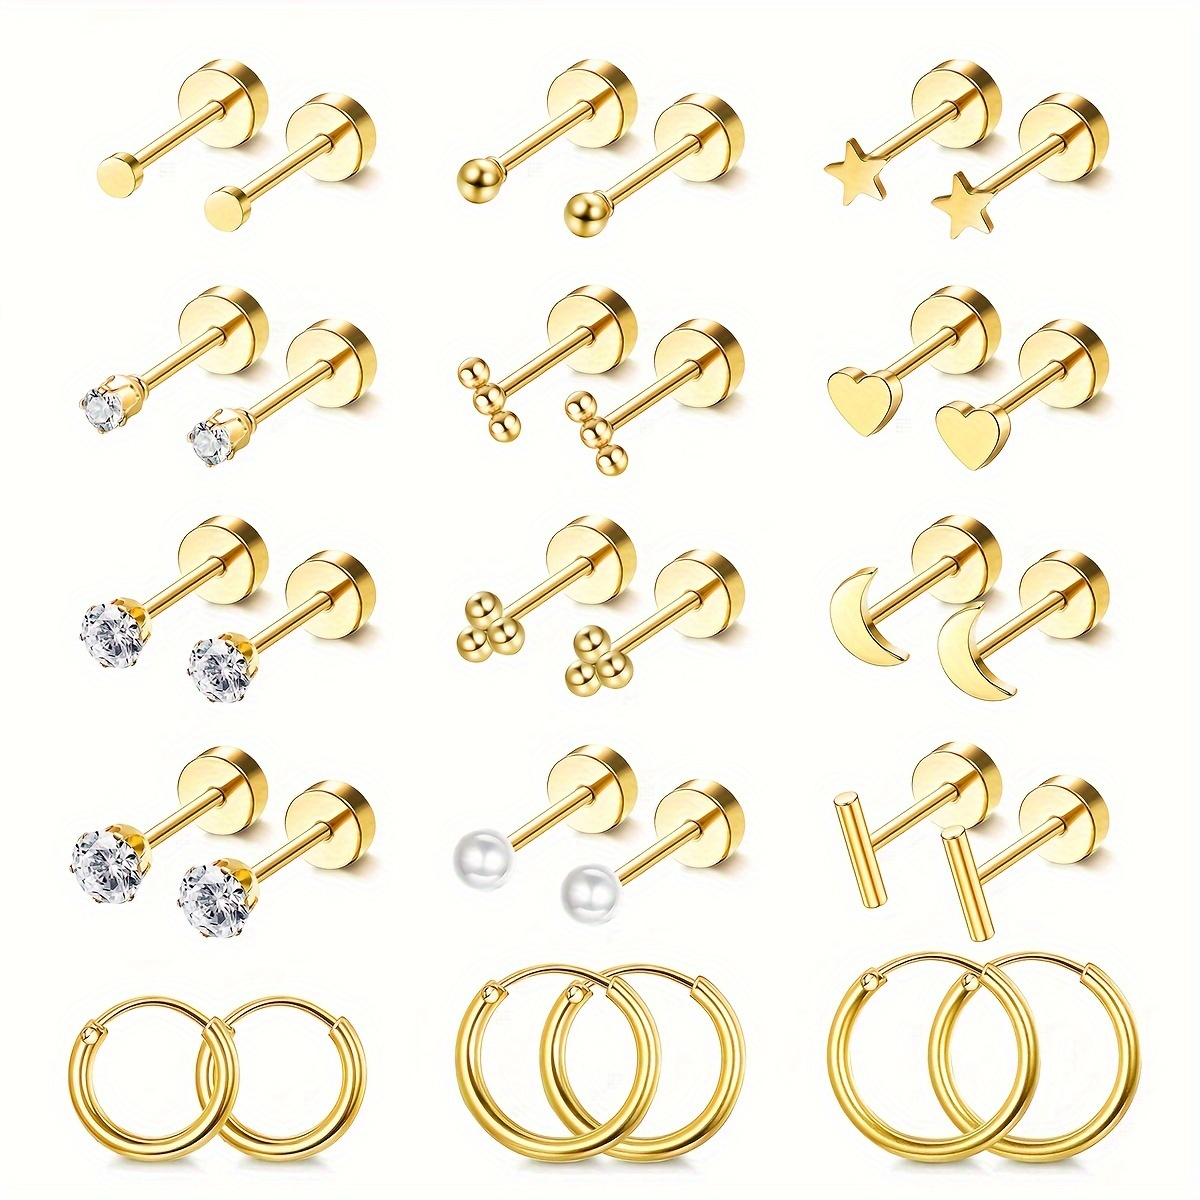 

15 Pairs Small Flat Back Stud Earrings For Women Men 14k Plated Surgical Stainless Steel Earring Sets Hypoallergenic Tiny Screw Back Cartilage Earring Small Hoops 8-10-12mm